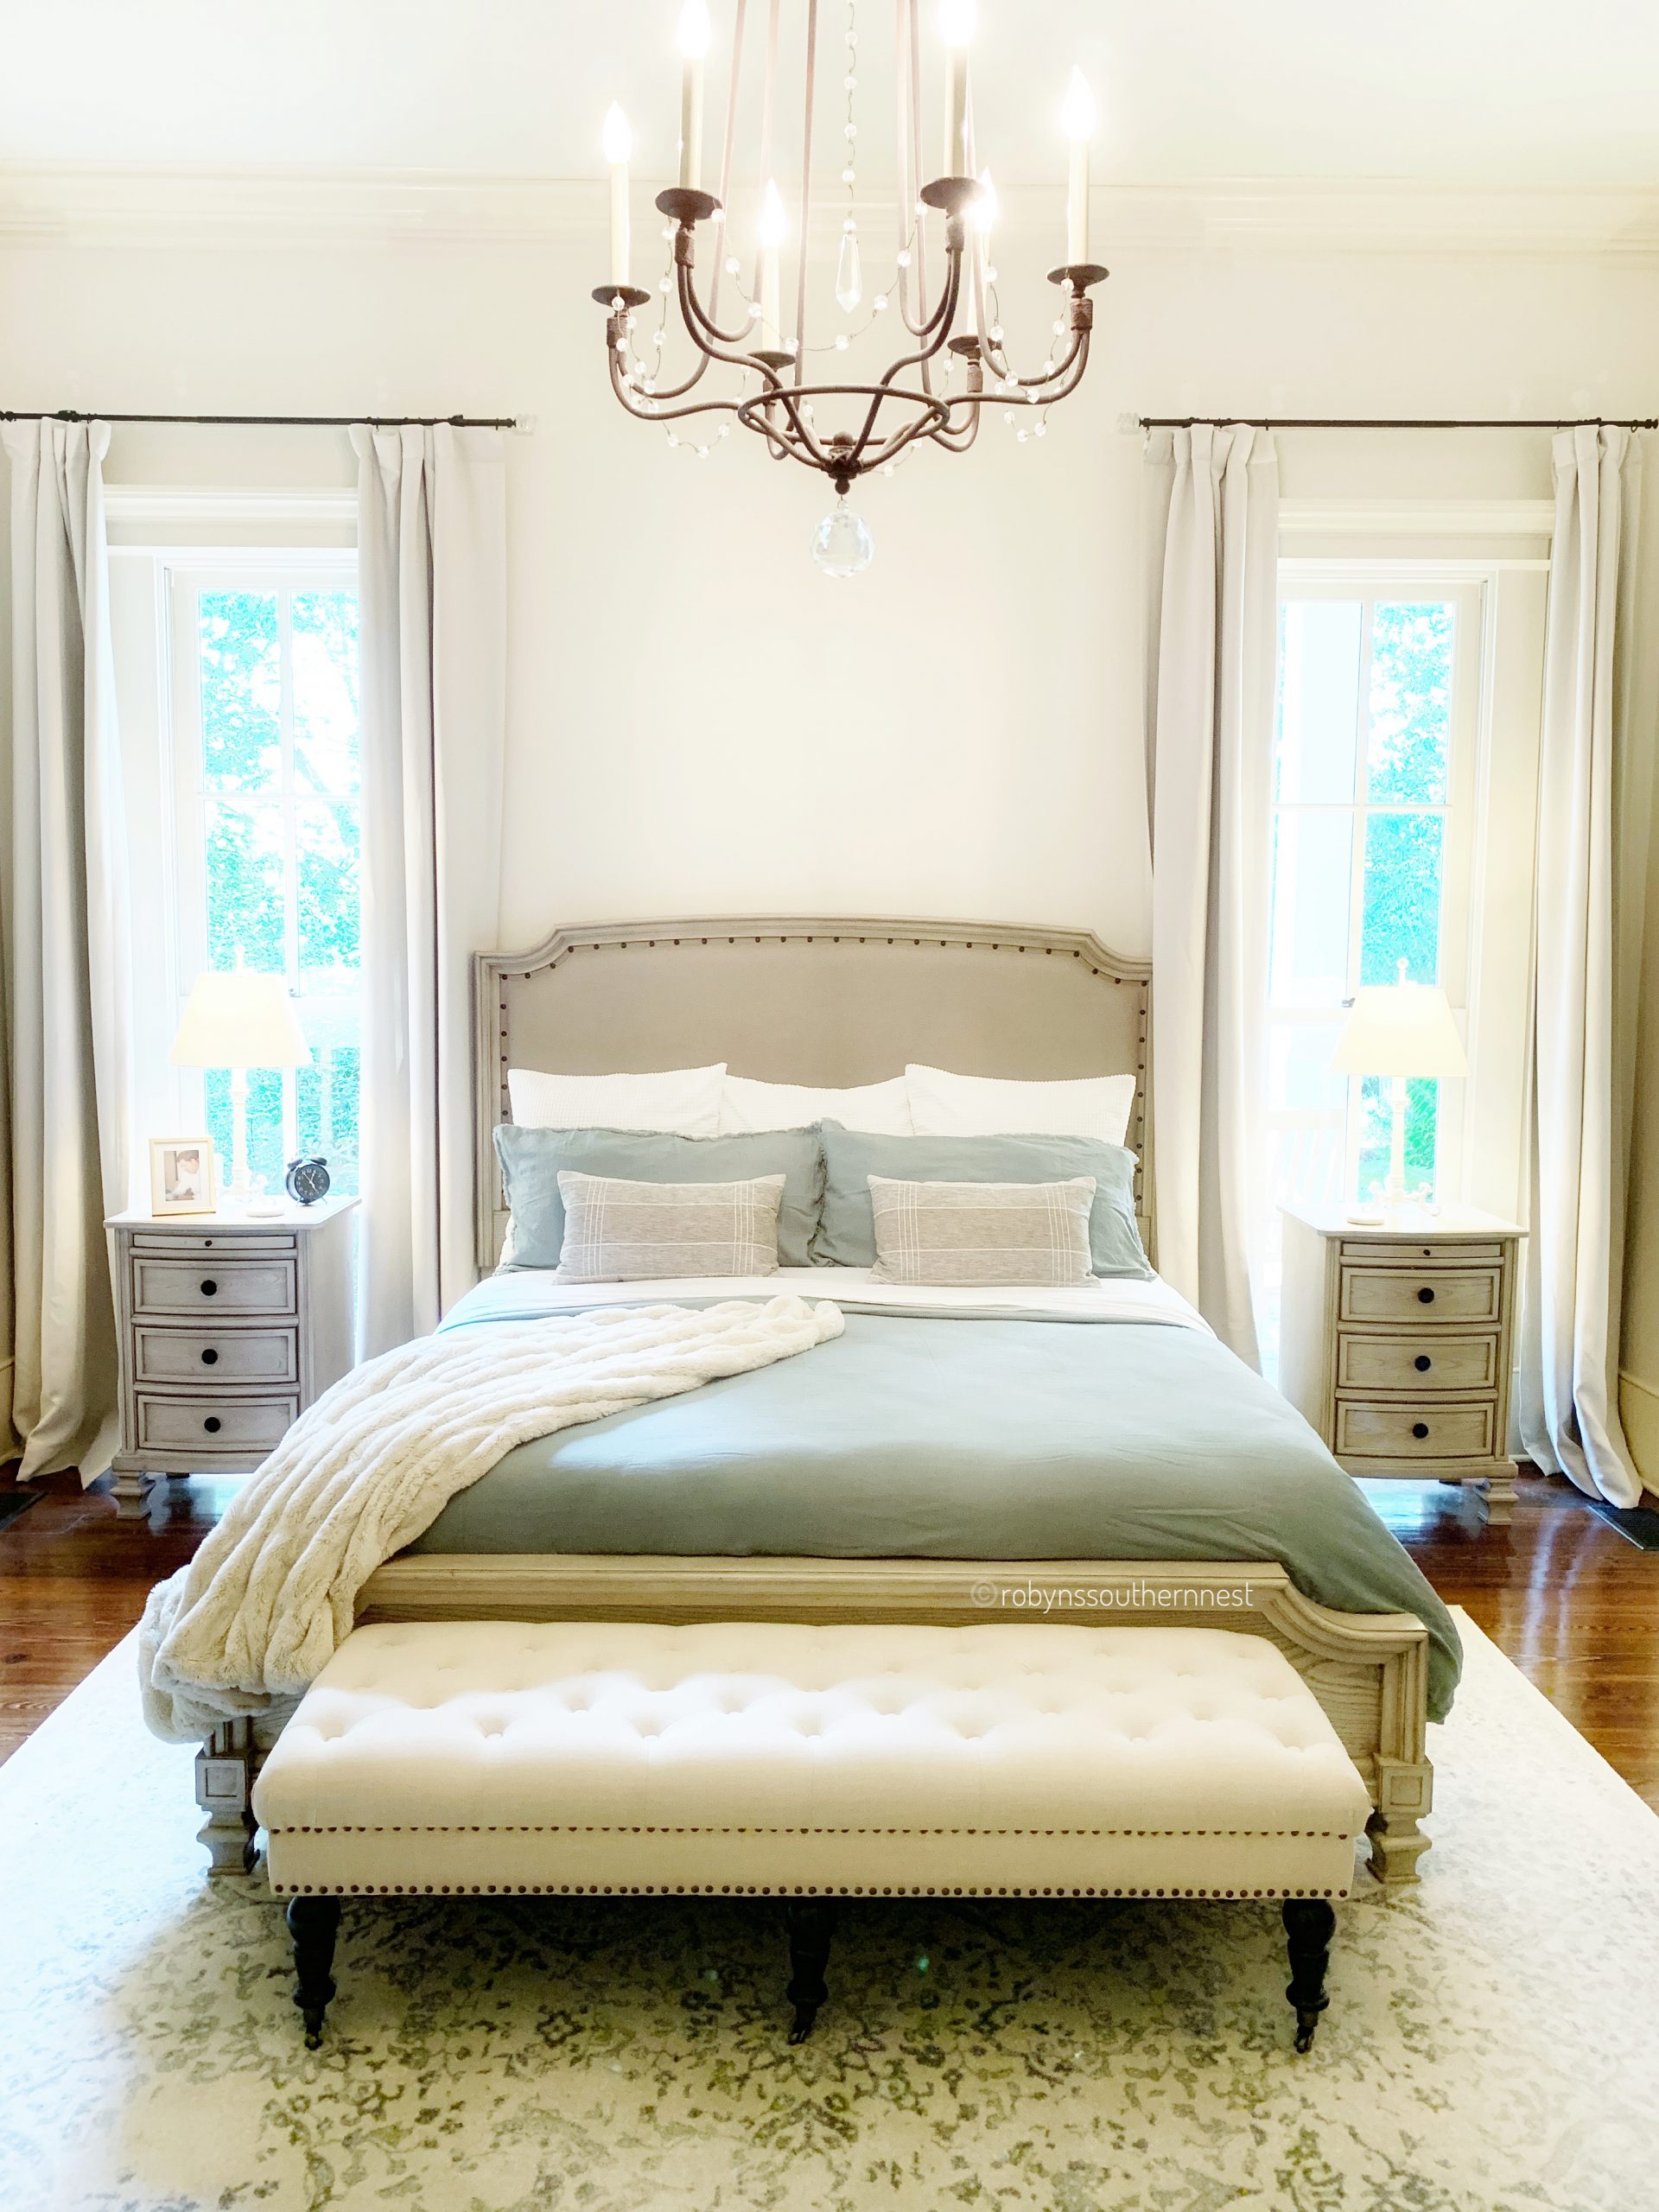 Review of Our Casaluna Bedding • Robyn's Southern Nest